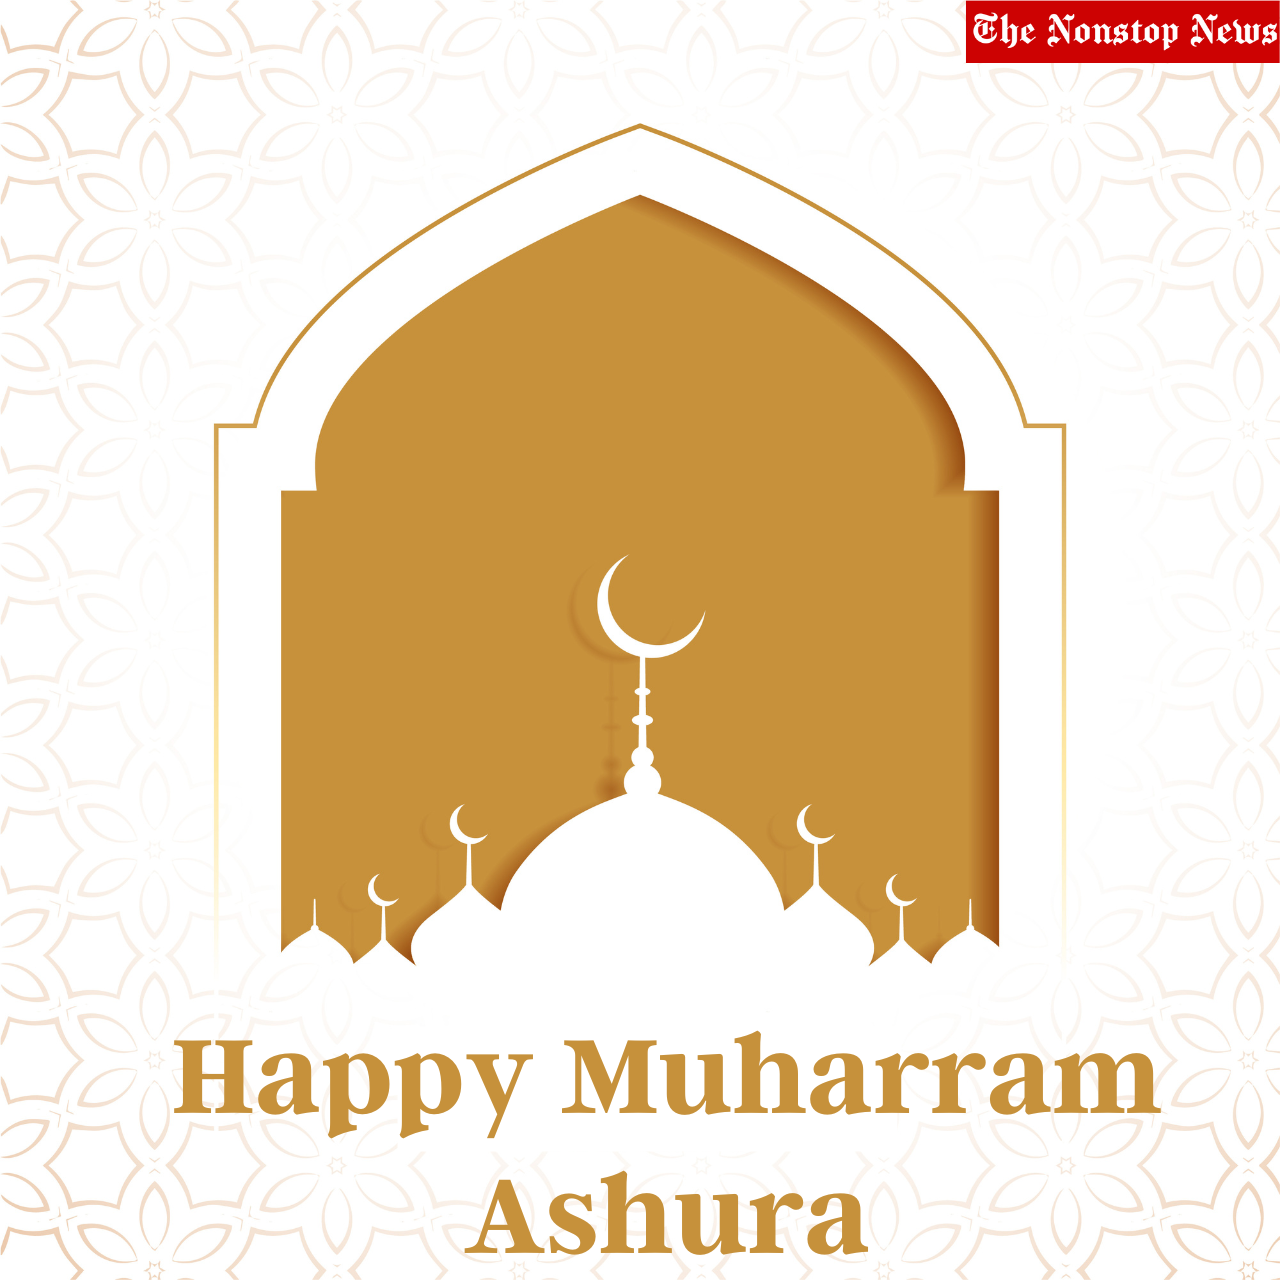 Happy Muharram Ashura 2022: Arabic Quotes, Greetings, Messages, Posters, Images, Wishes, Dua, Shayari to share